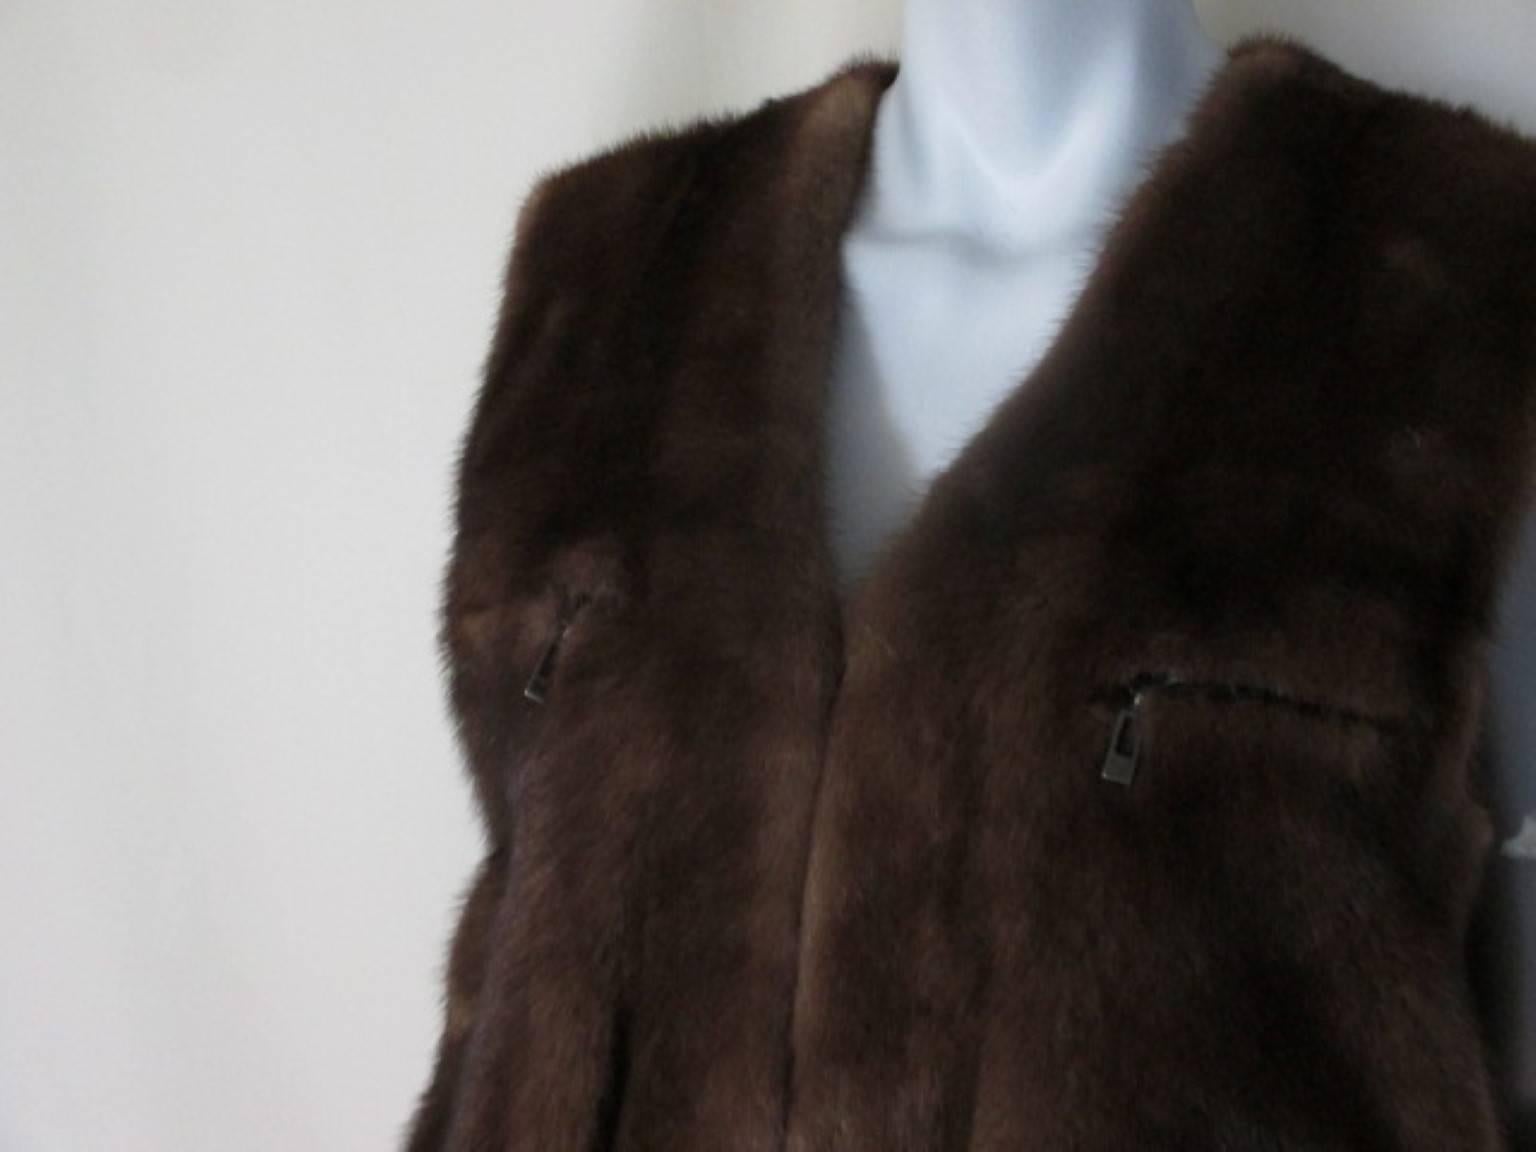 This vest is made of very soft mink fur, has 2 side pocket and 2 zipper pockets.

We offer more exclusive mink items, view our frontstore

Details:
It has belt loops where you can put a leather belt or silk scarf.
Its in very good vintage